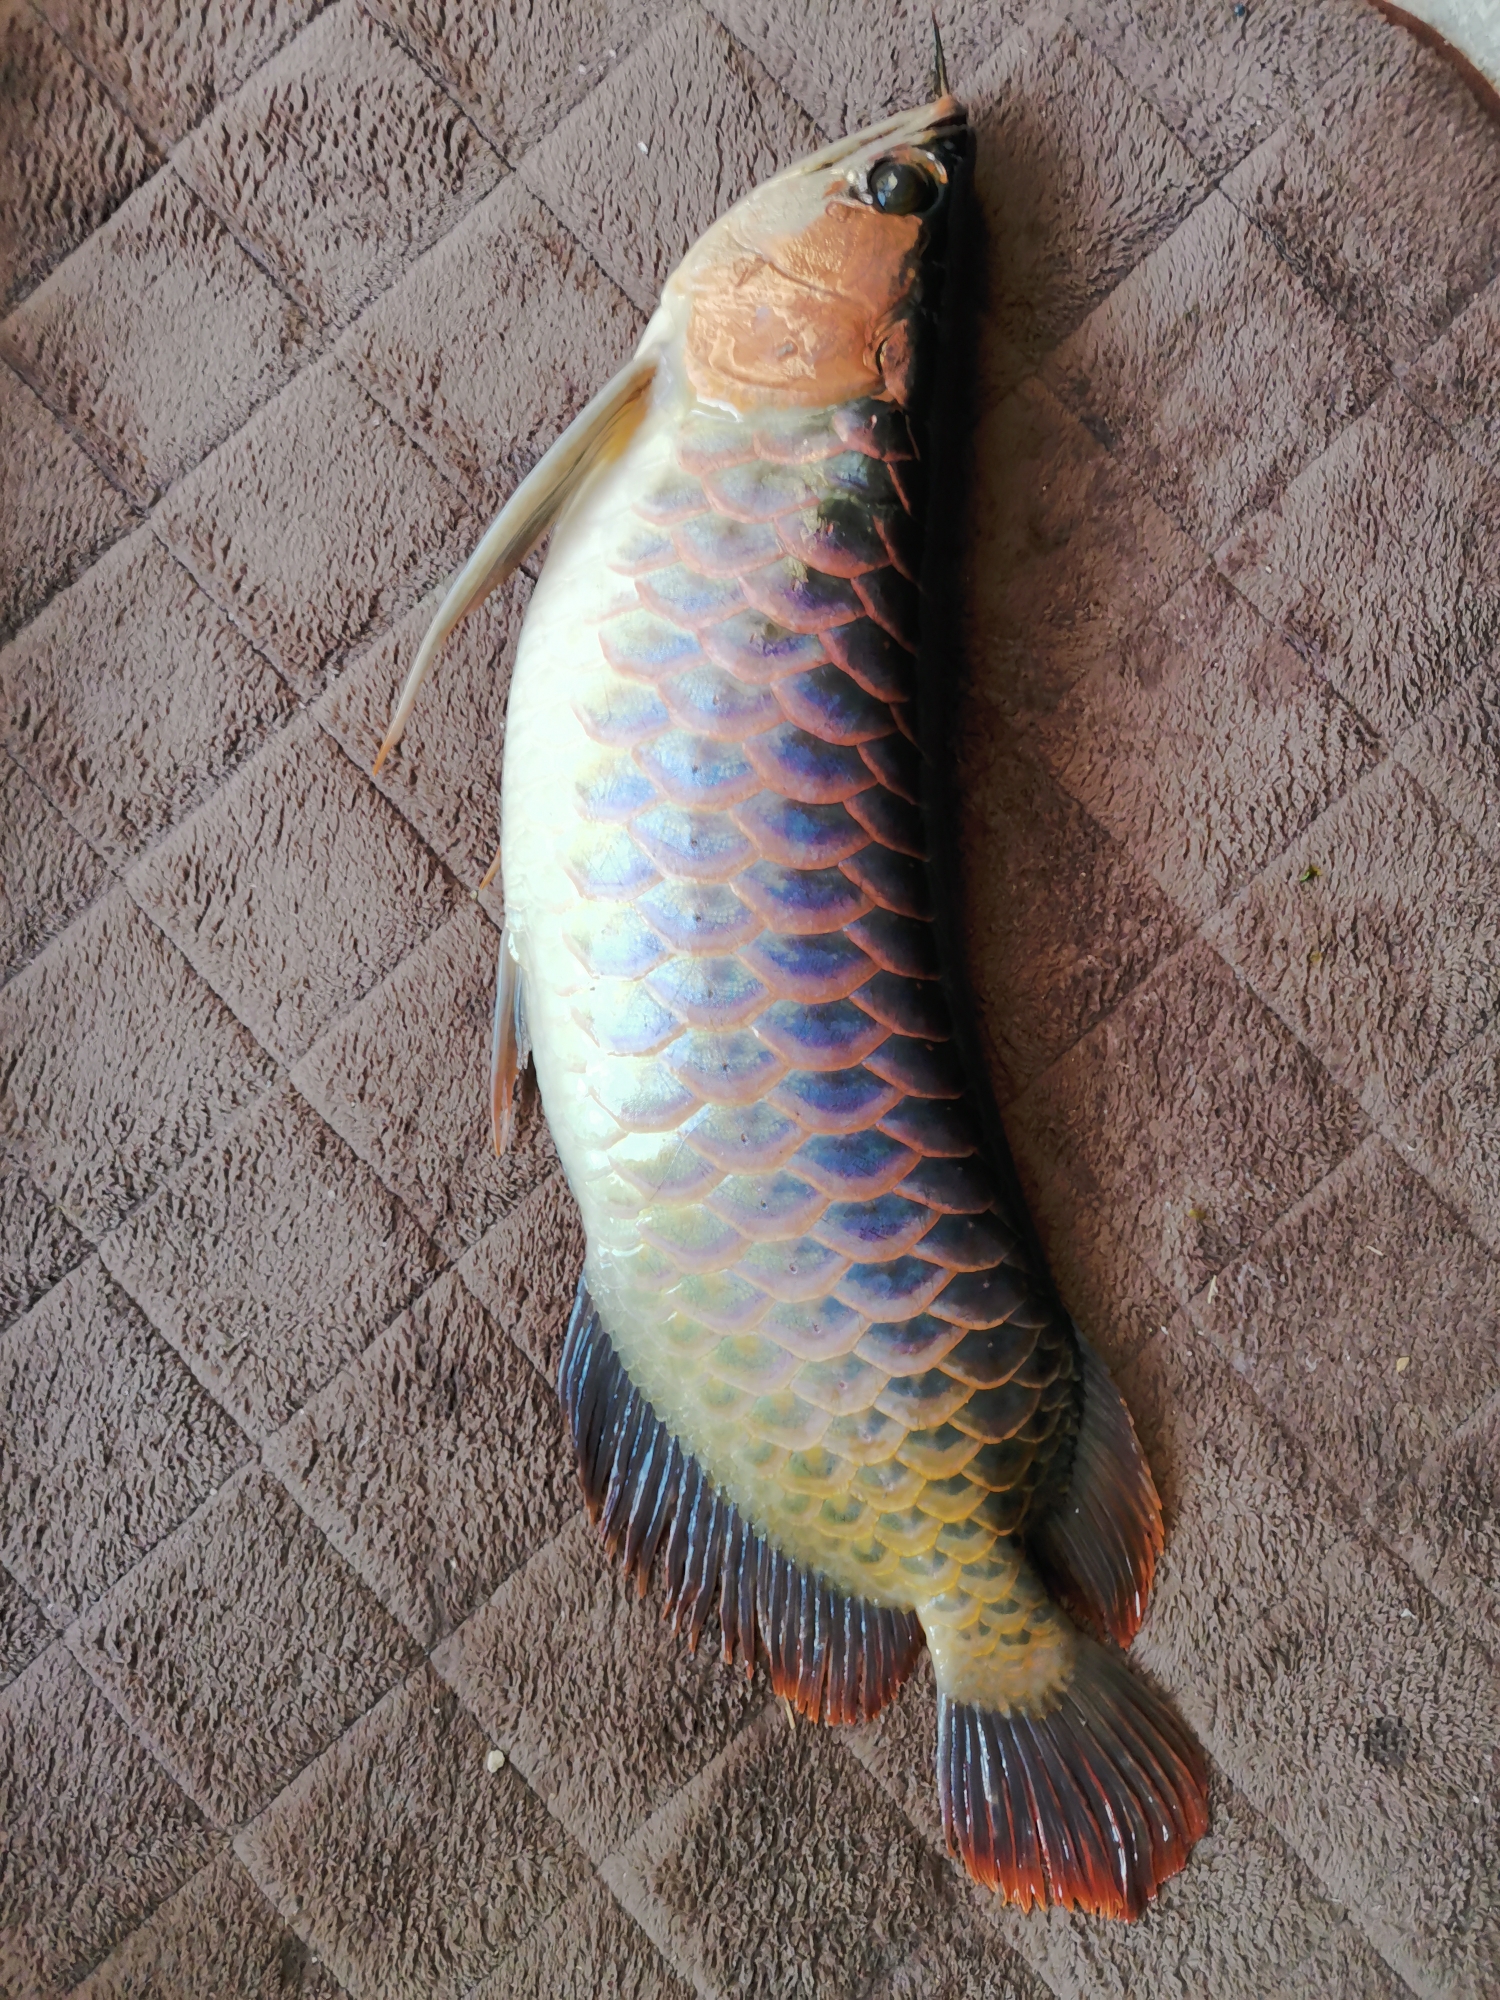 Arowana that has been raised for more than 2 years suddenly